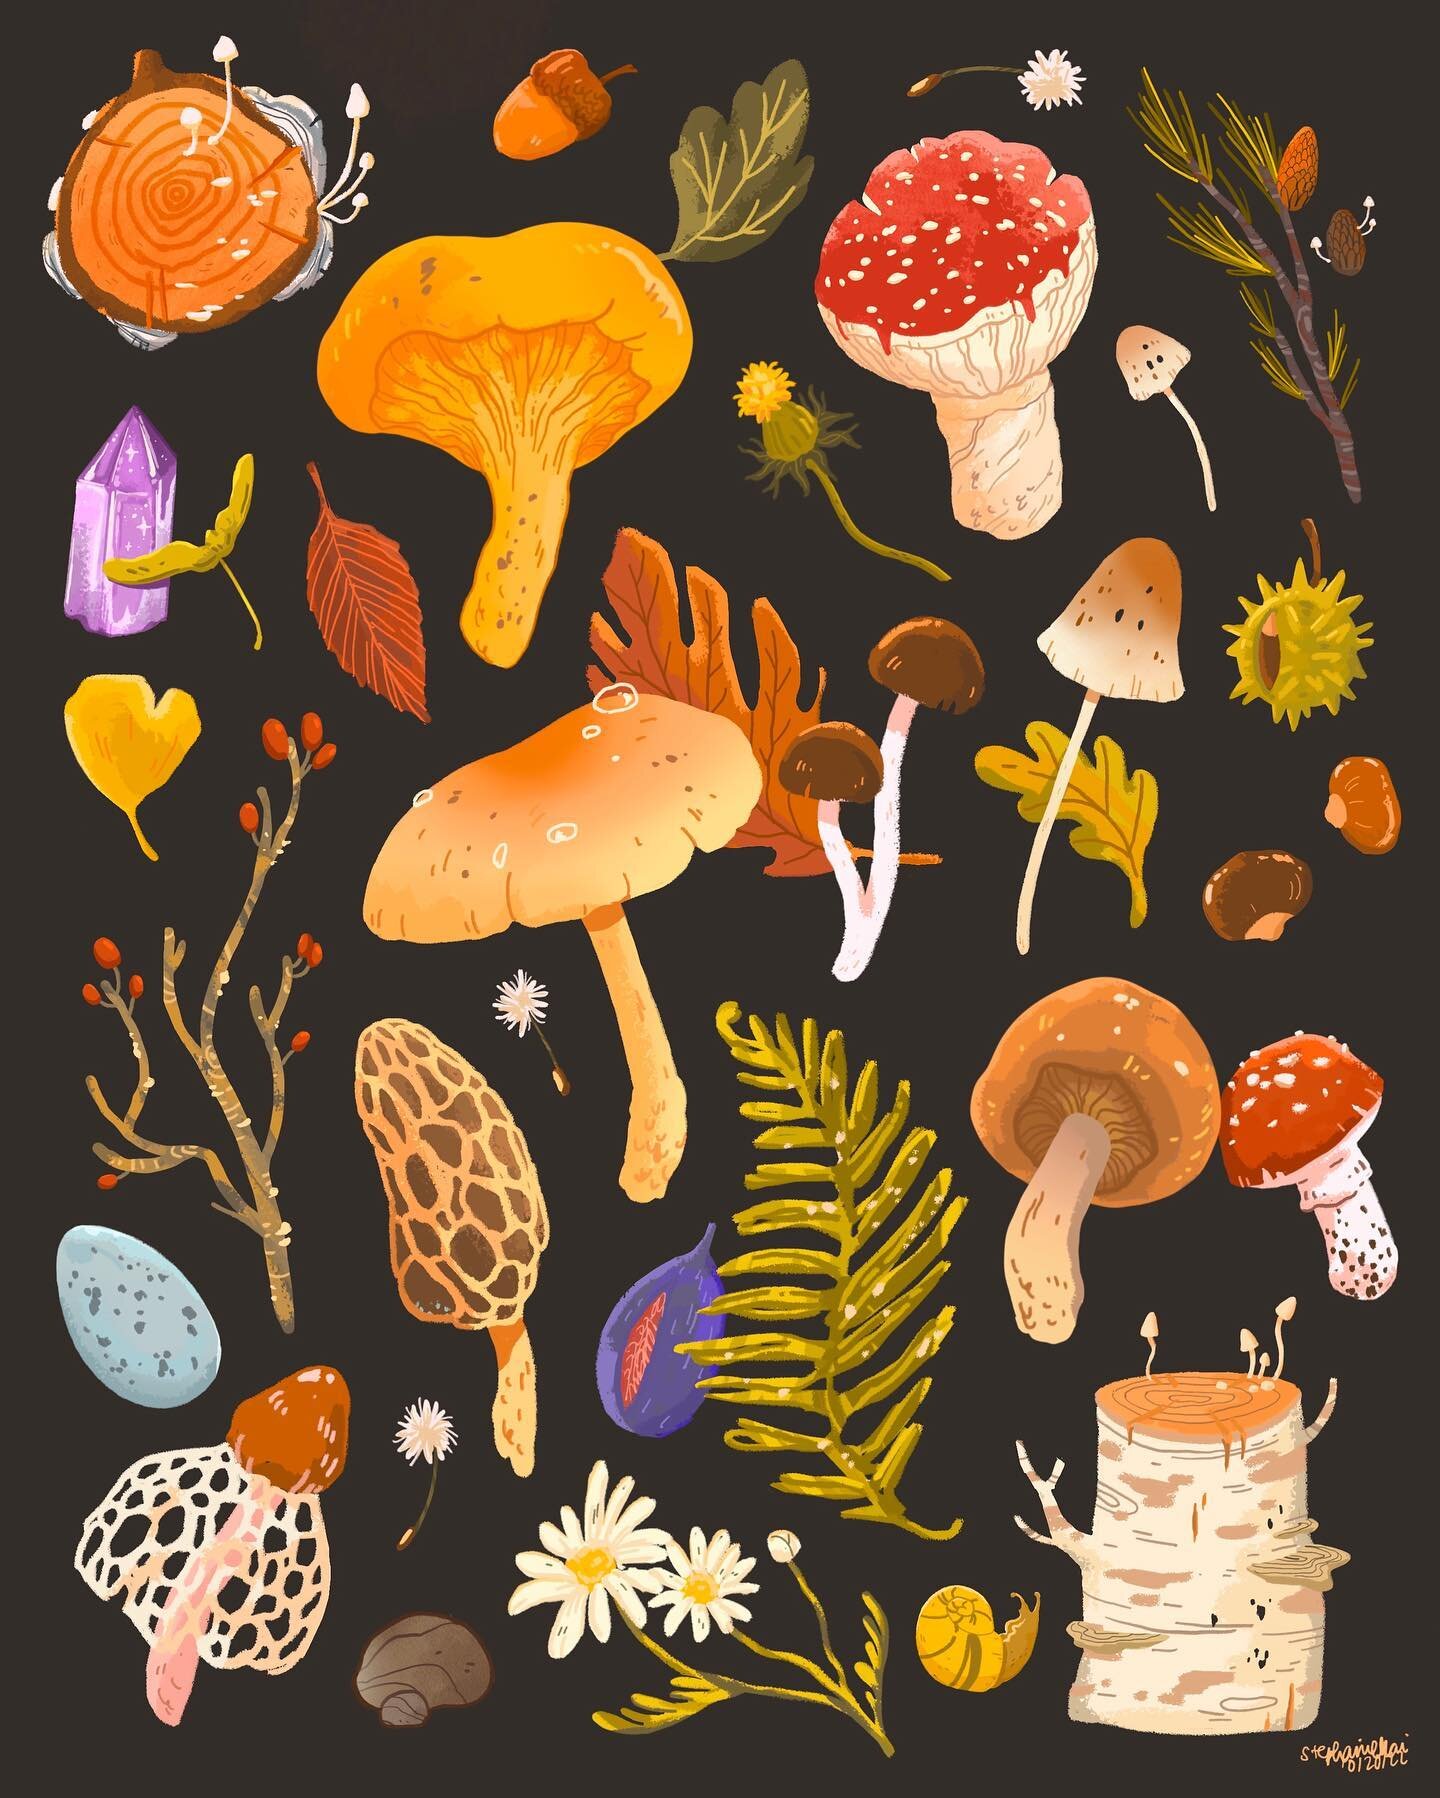 Forest Floor Treasures // I had a lot of fun drawing cute fall things and ended up sketching all these colors and textures 🍄 🍁 🍂 

#illustagram #editorialart #illustree #draweveryday #kidlitart #artdaily #mushroomforaging #illustrationartists